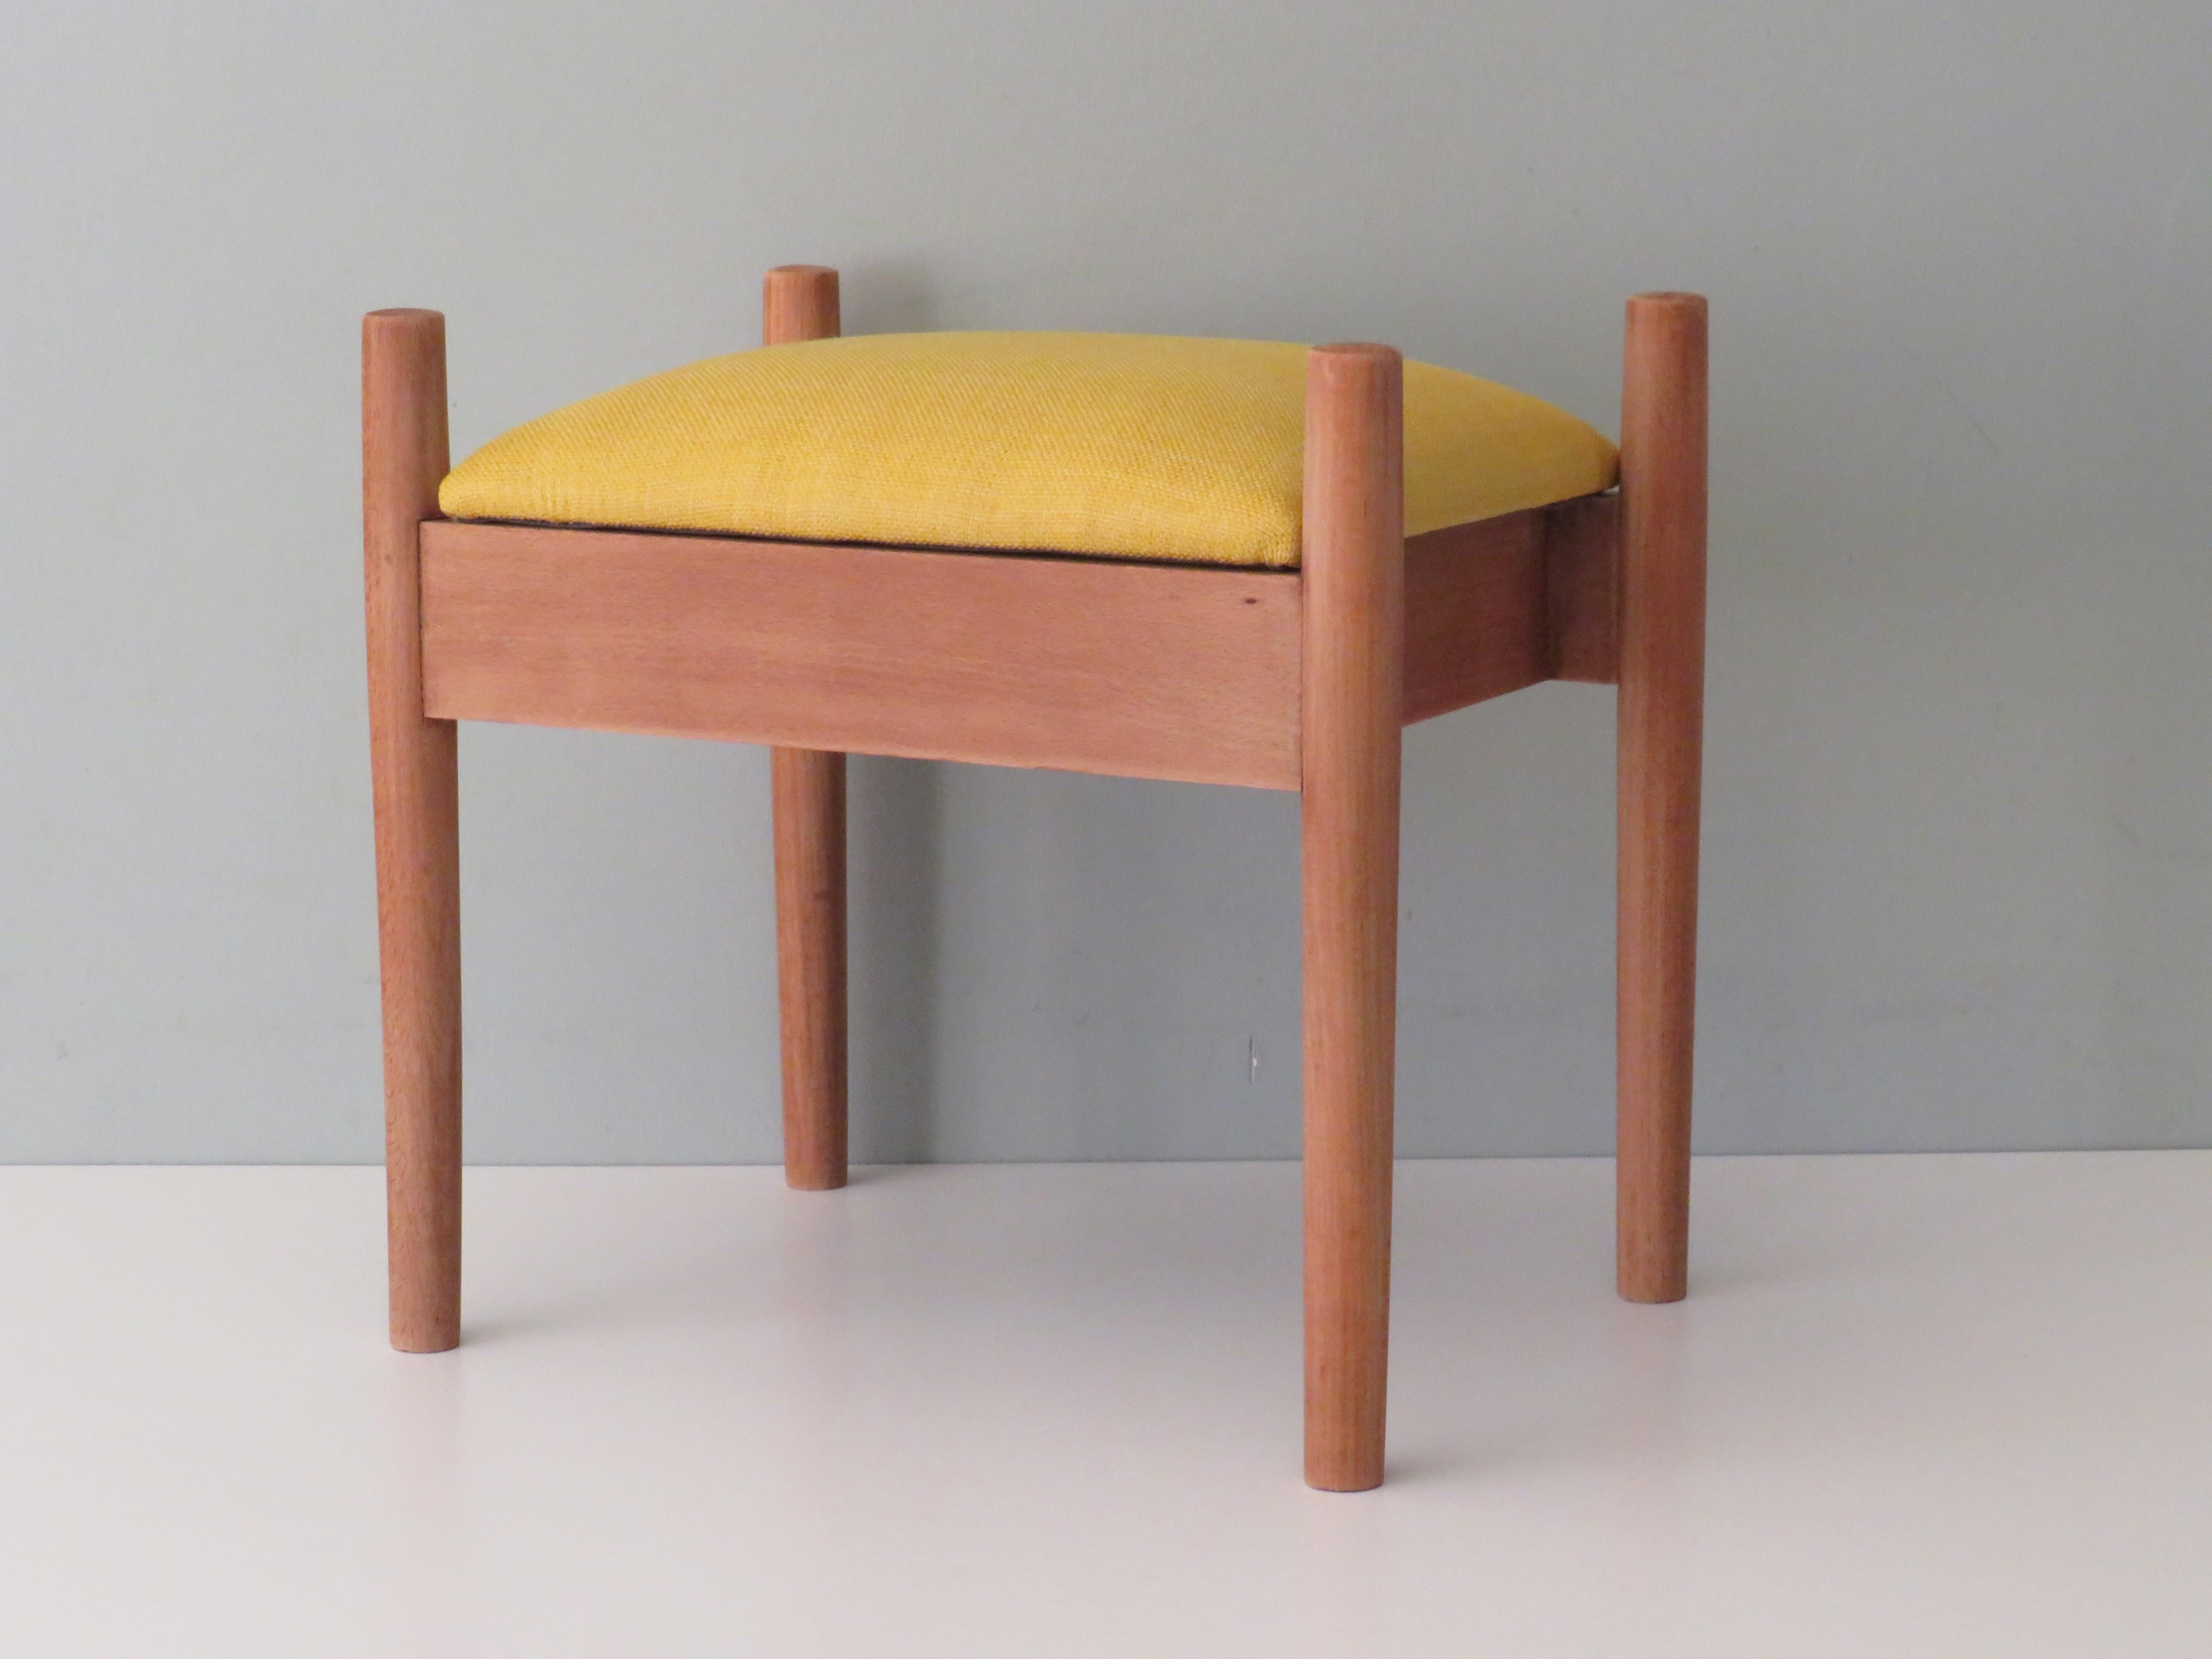 The wooden footstool has a new upholstery of a high-quality yellow woven fabric.